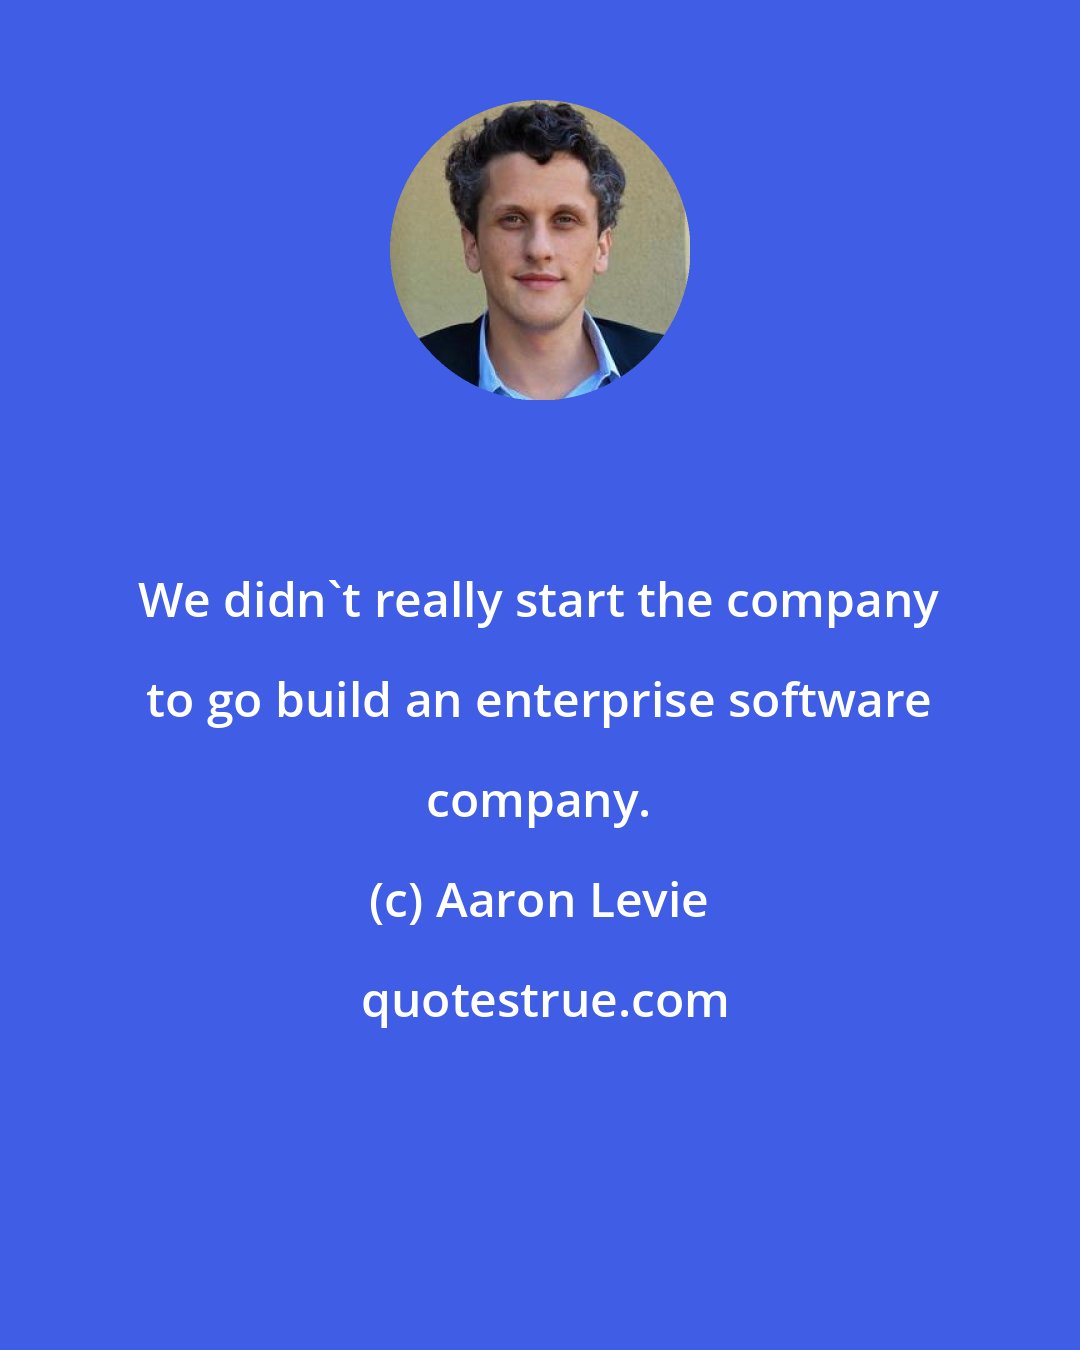 Aaron Levie: We didn't really start the company to go build an enterprise software company.